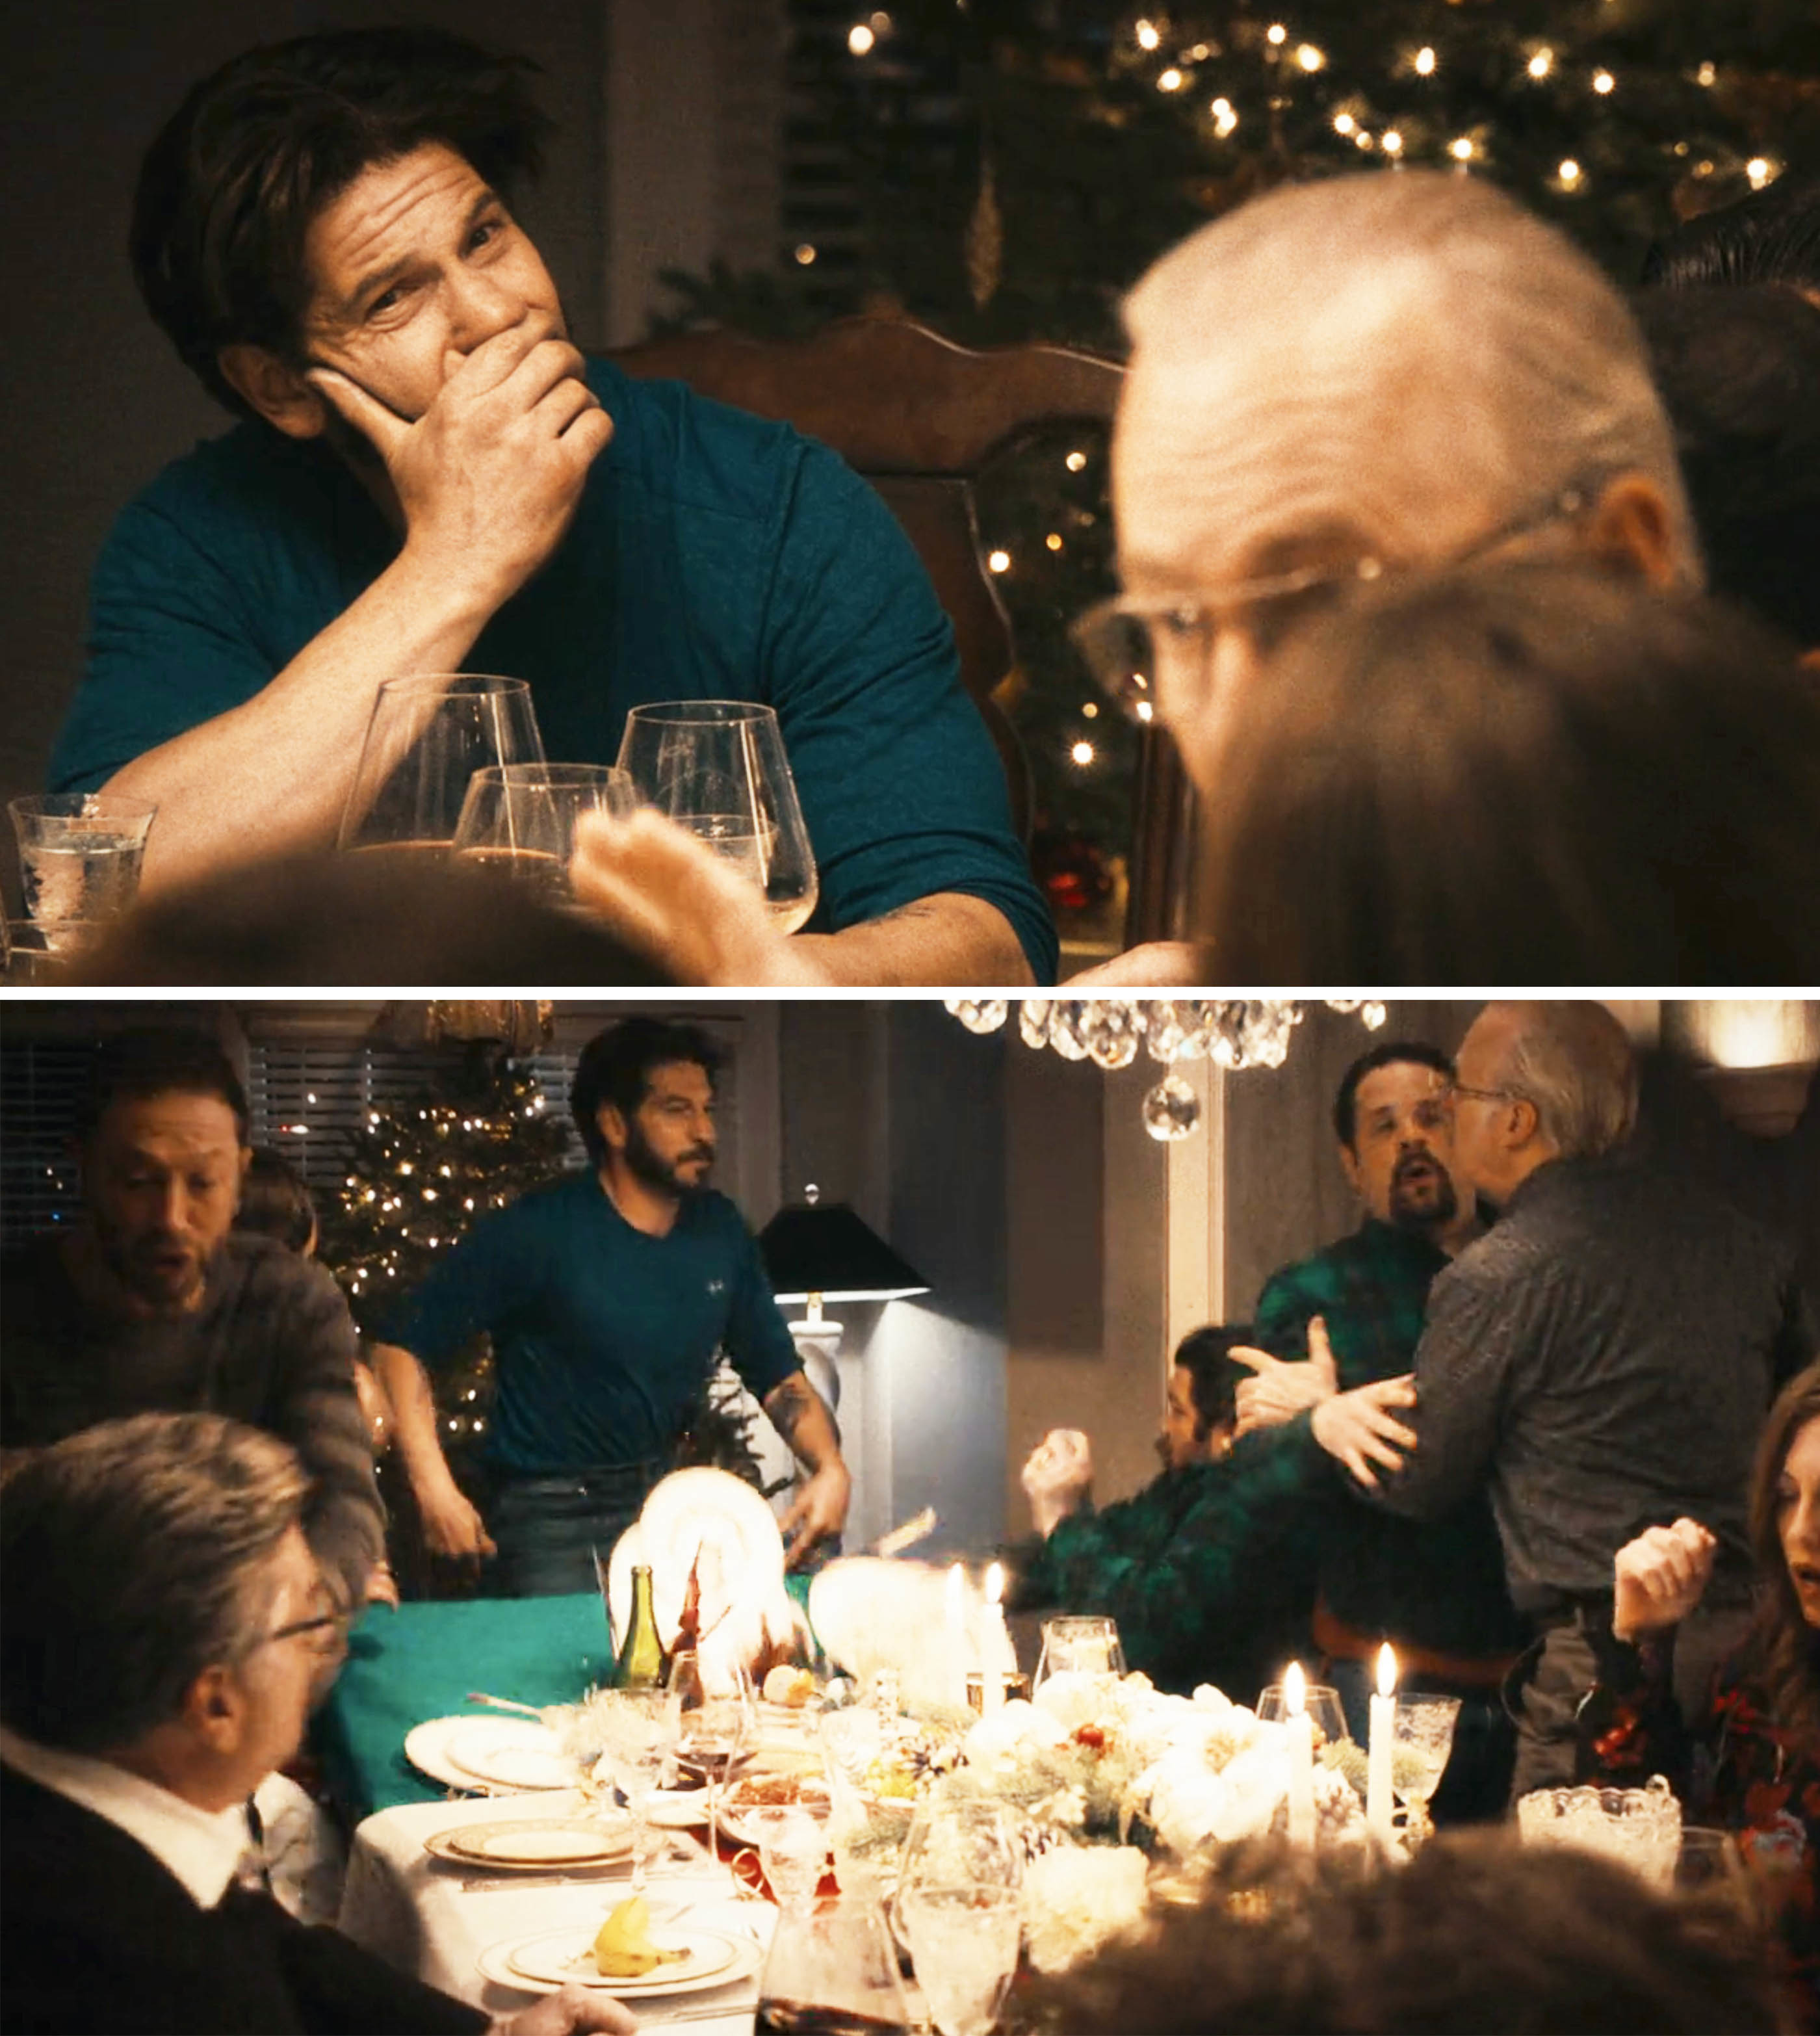 Close-ups of the scene around the table